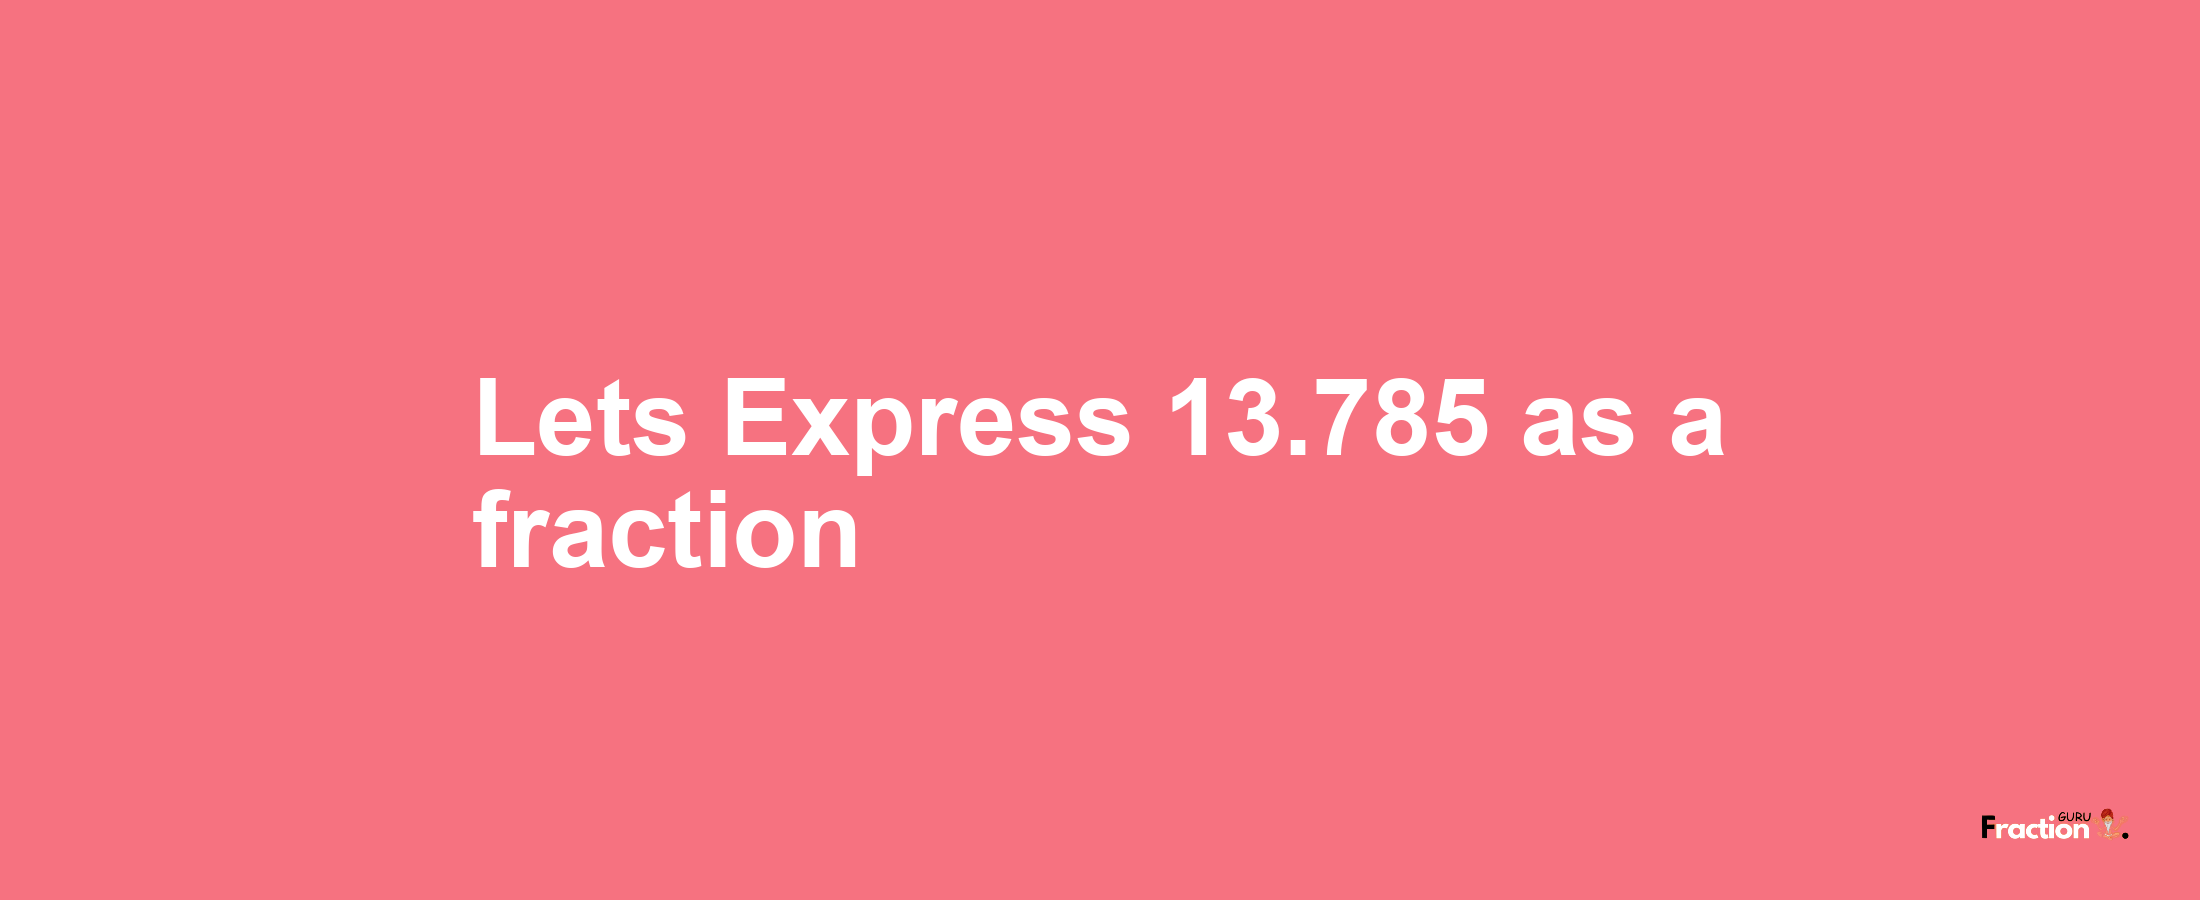 Lets Express 13.785 as afraction